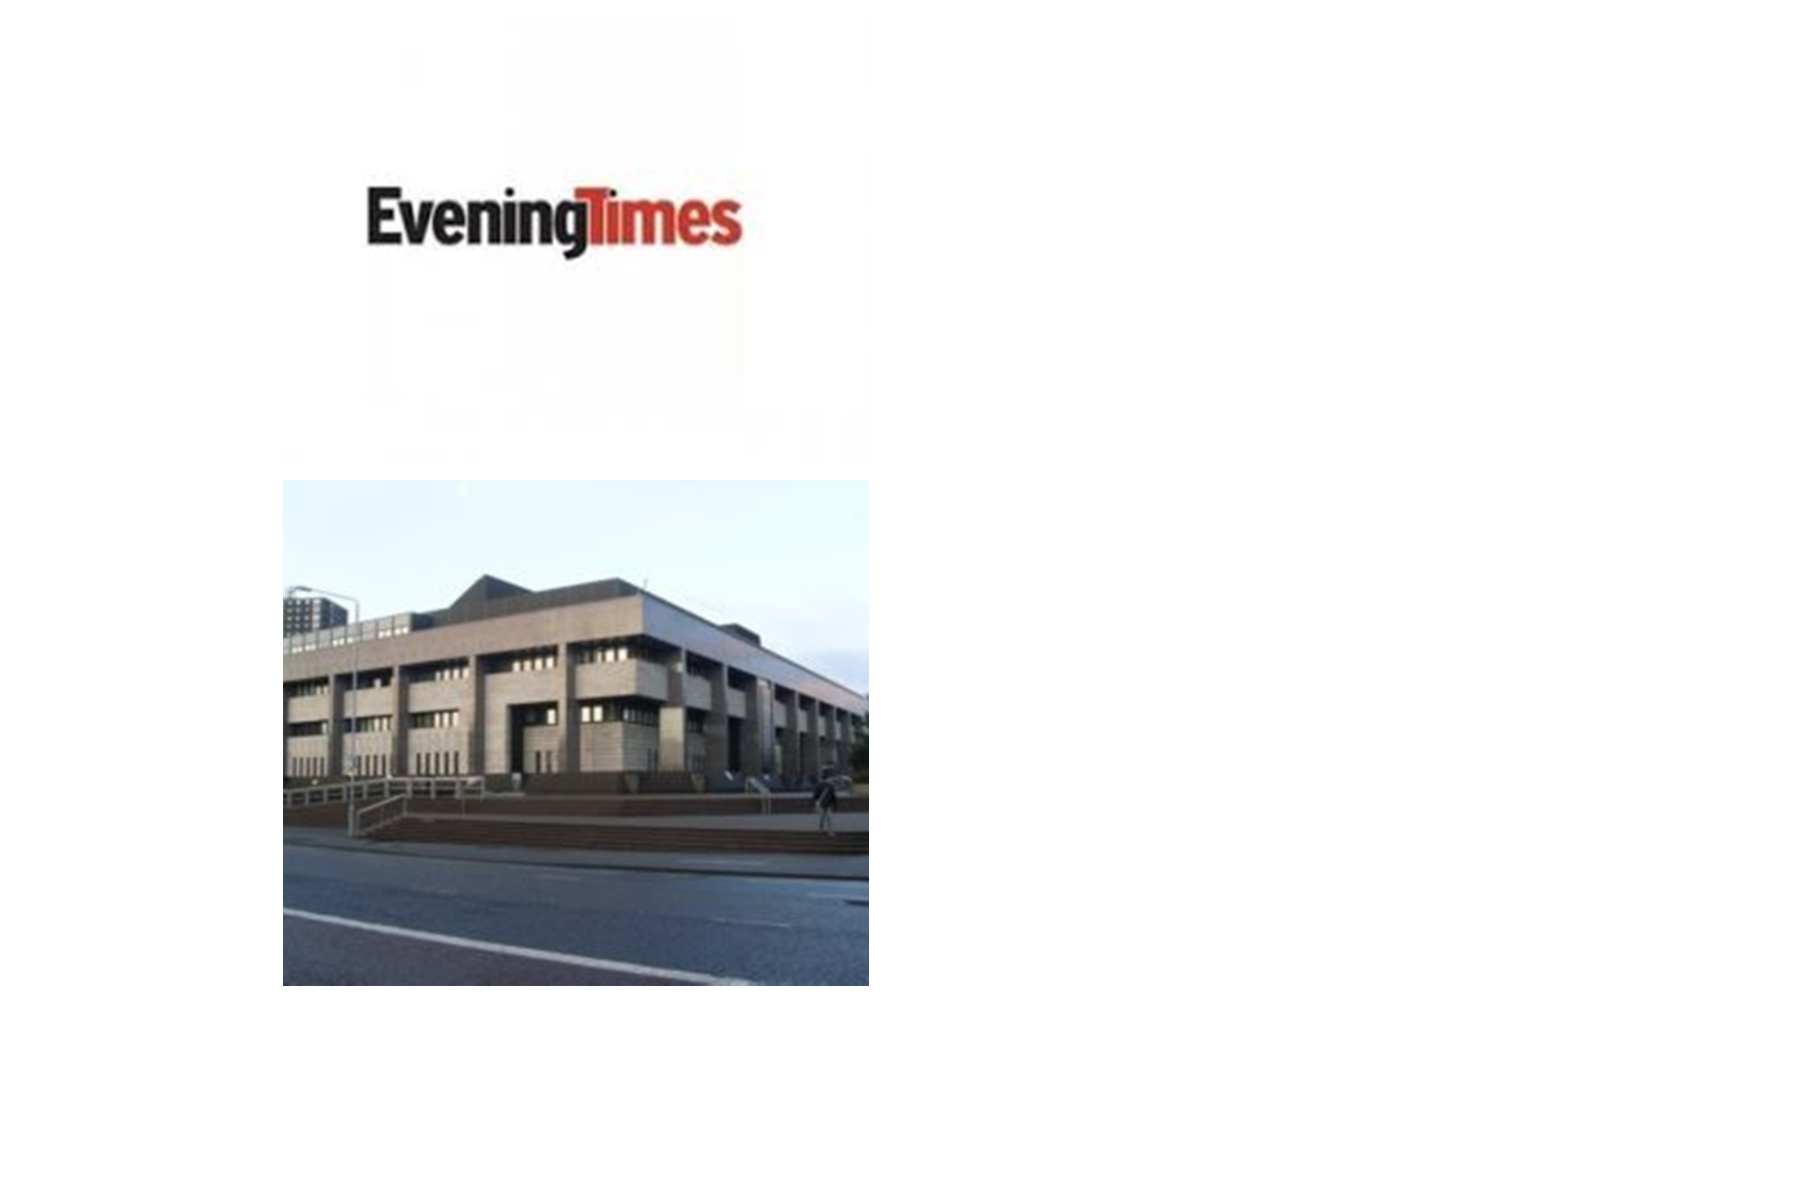 The Evening Times Use Selective Bias To Report About Man, Adnan Ahmed, Adamantly Pleading “Not Guilty” To “Being Accused of Approaching School Girls In Secluded Lanes”